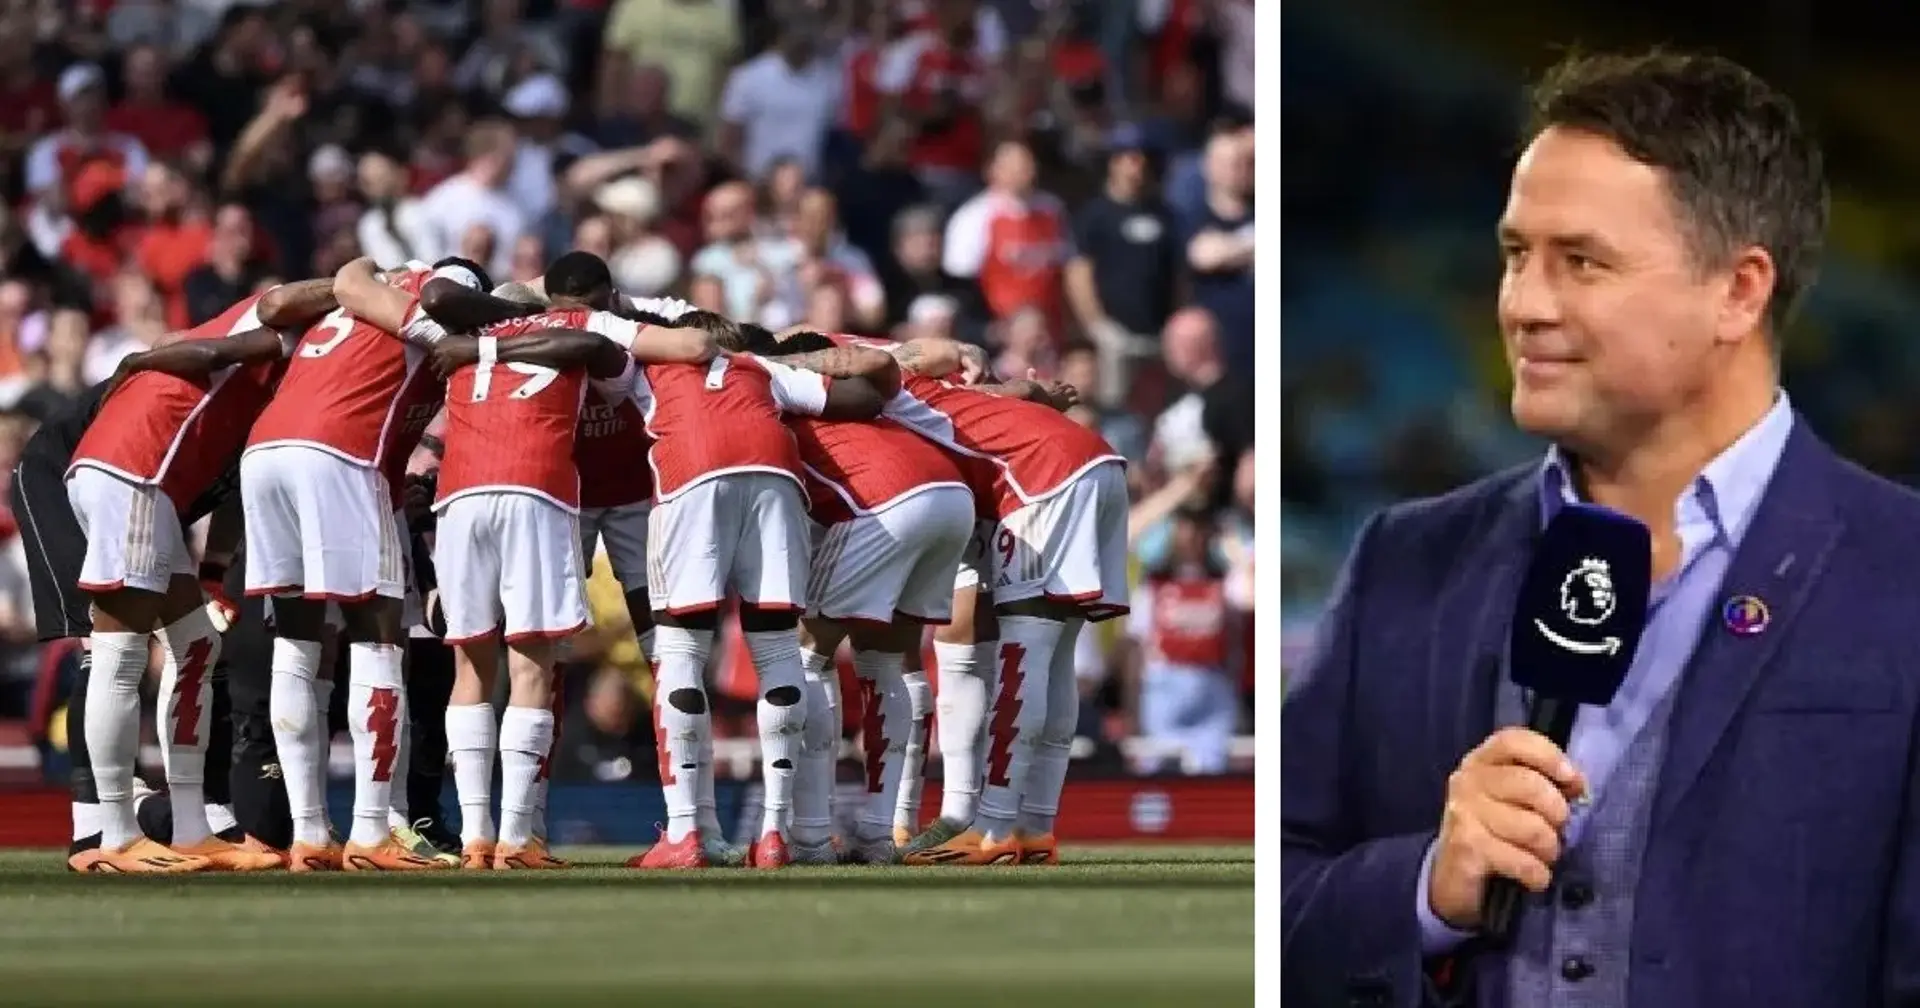 'I love this lad': Michael Owen says Arsenal player with one appearance is top-class